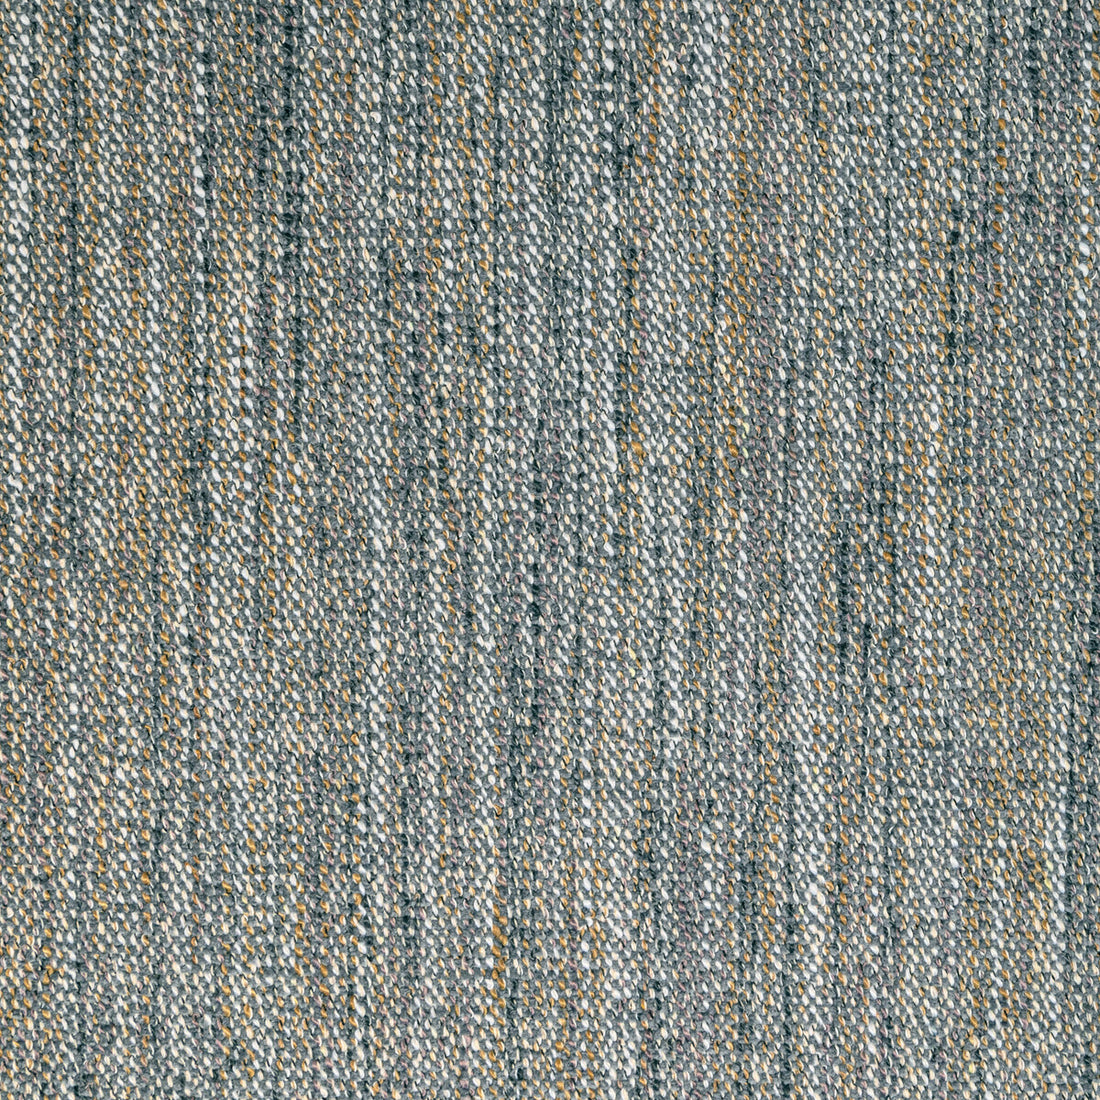 Delfino fabric in granite color - pattern 36748.521.0 - by Kravet Contract in the Refined Textures Performance Crypton collection